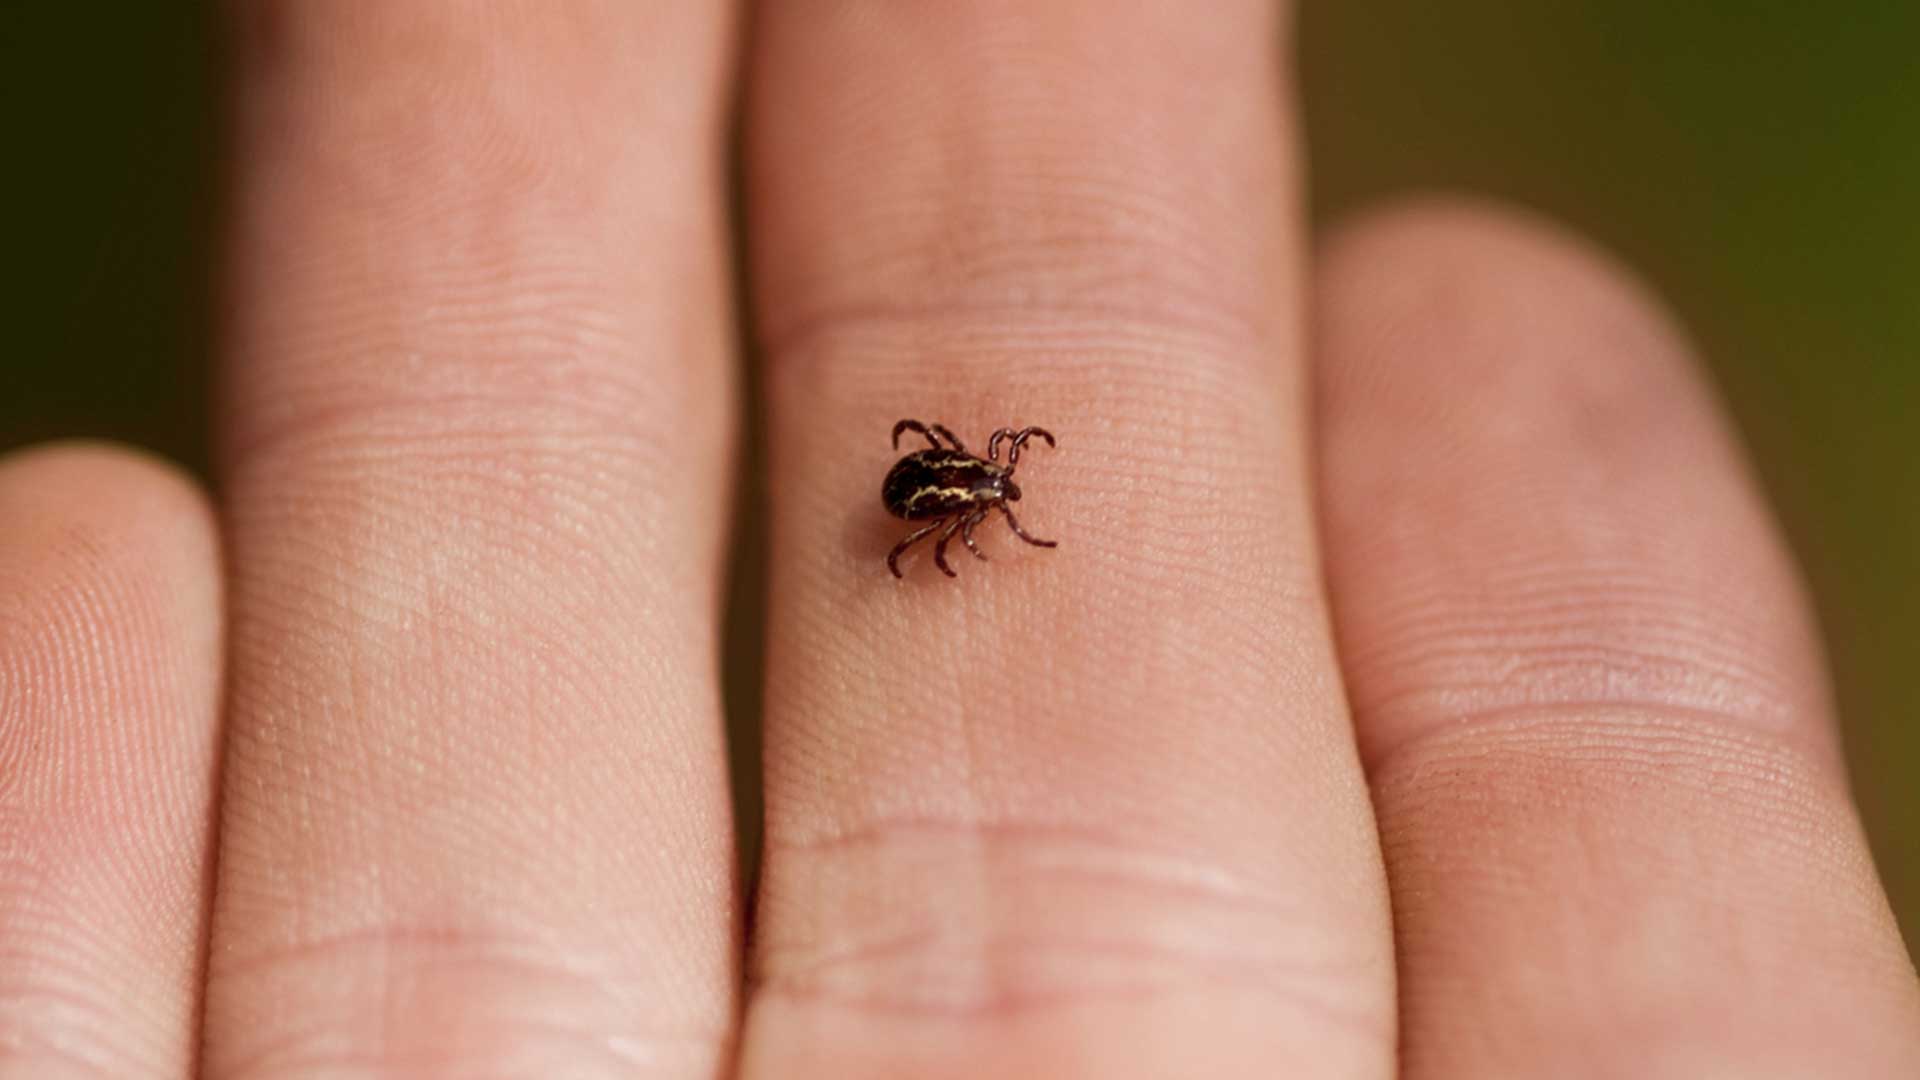 Tick crawling over someone's fingers